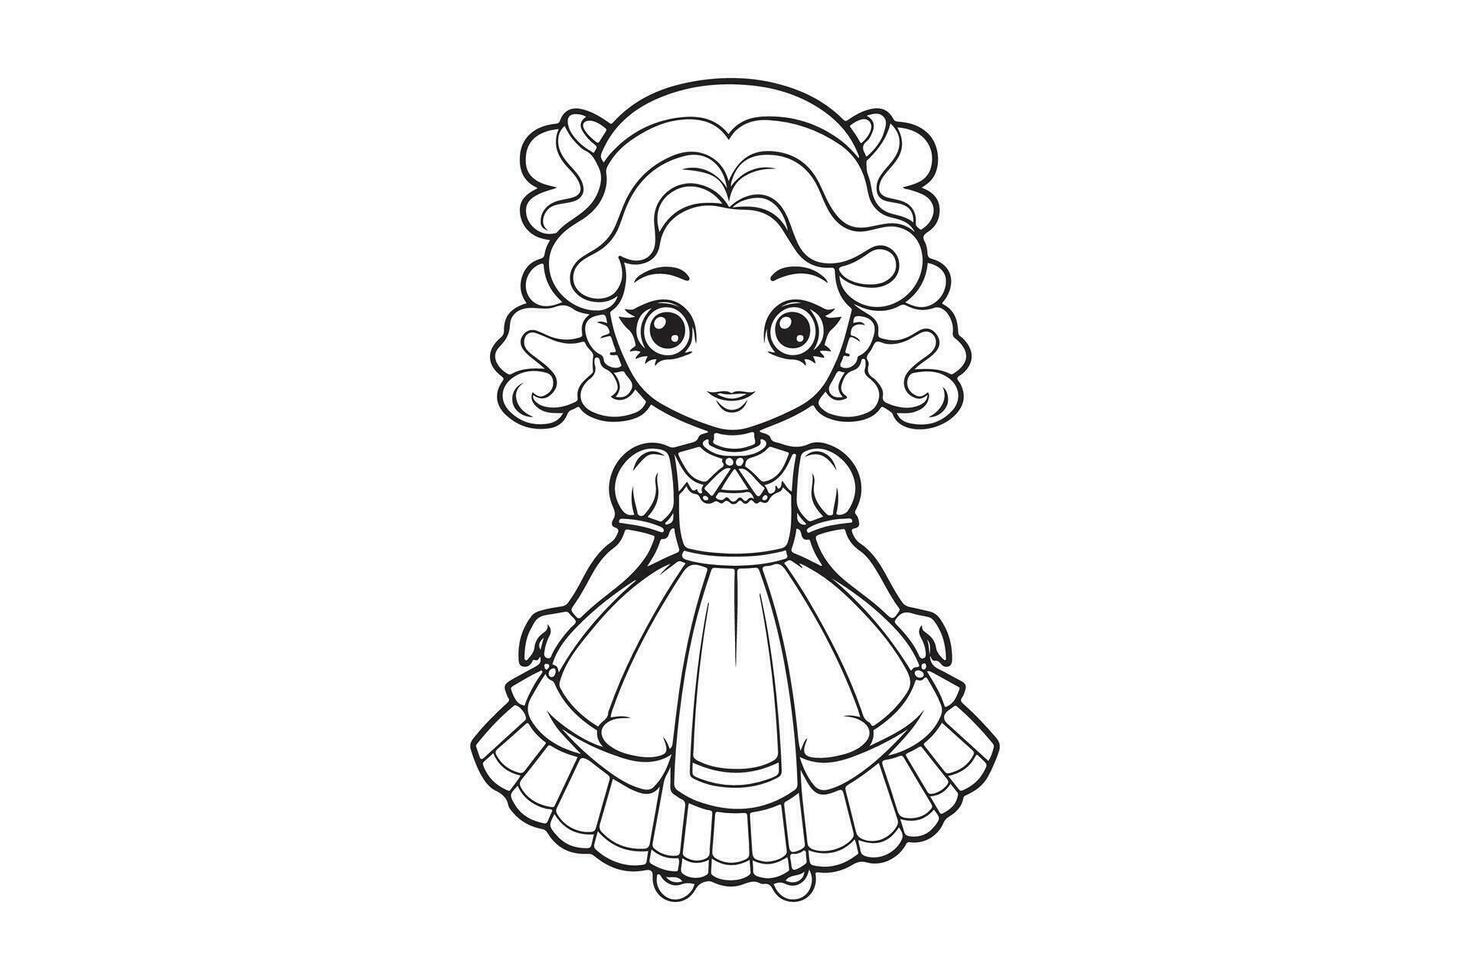 Best Printable Coloring Pages for Kids, Coloring Pages with Girls Characters vector